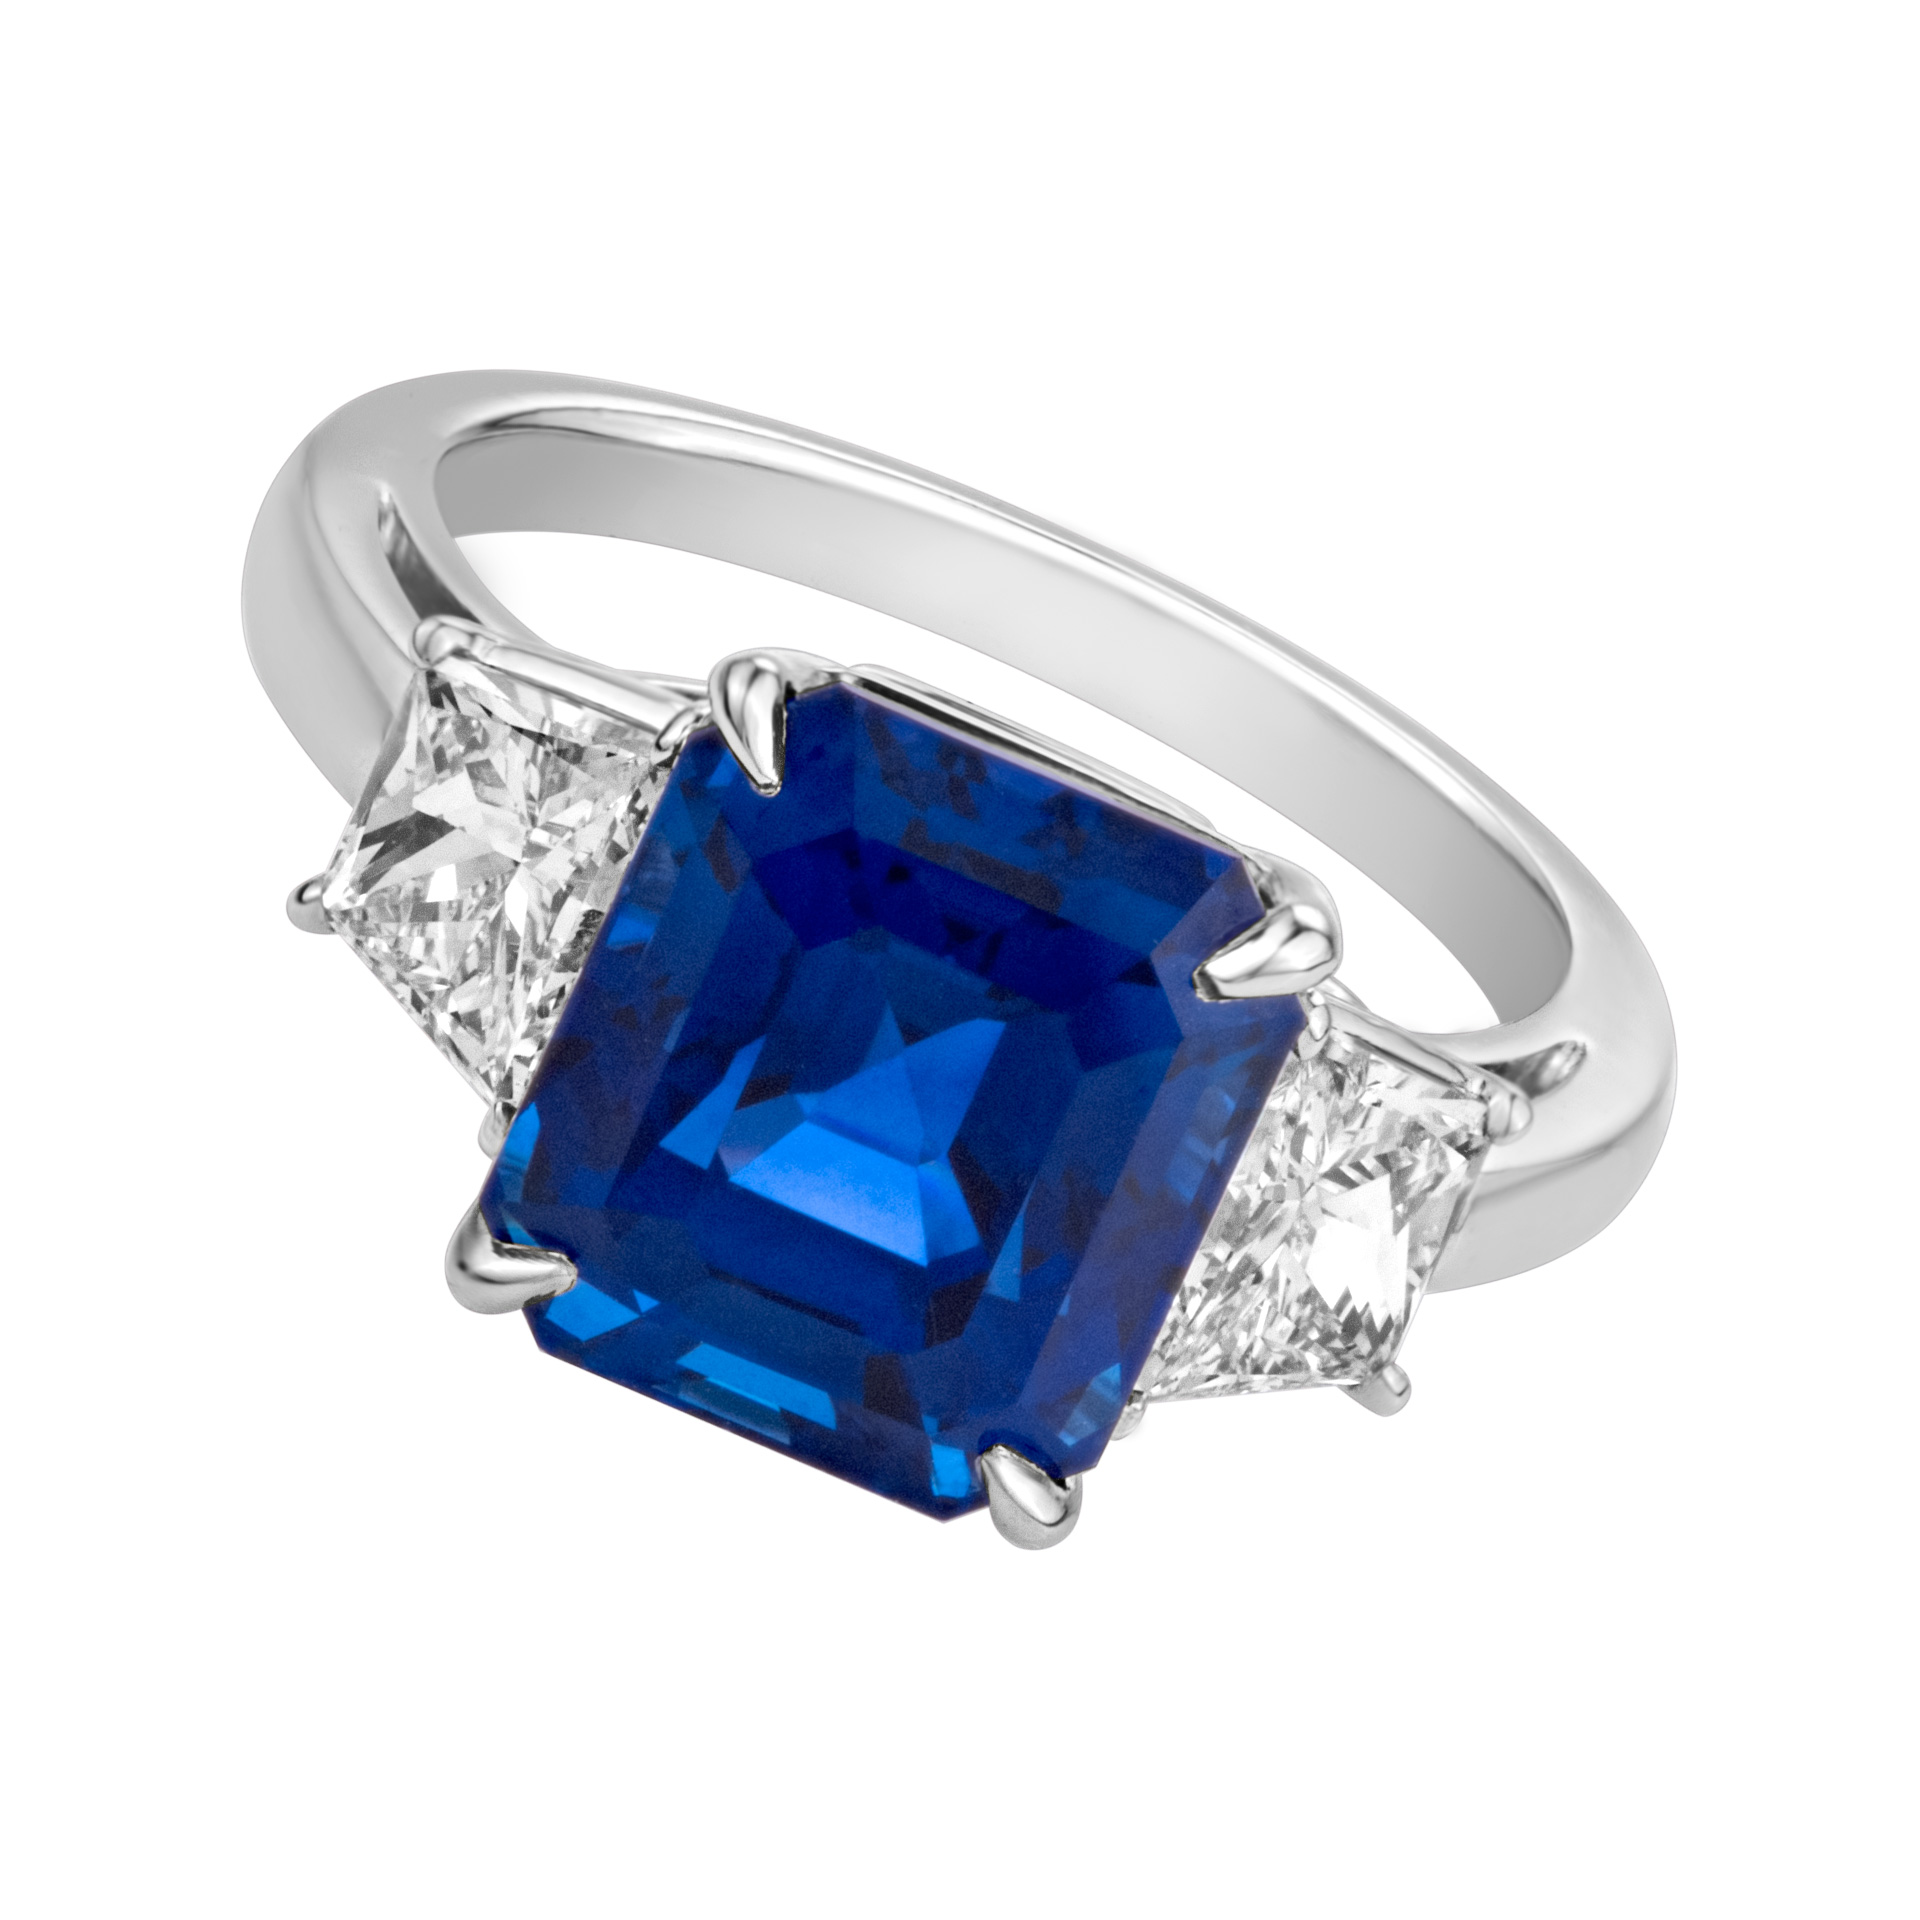 Certified Emerald cut sapphire and diamond ring set in Platinum image 1